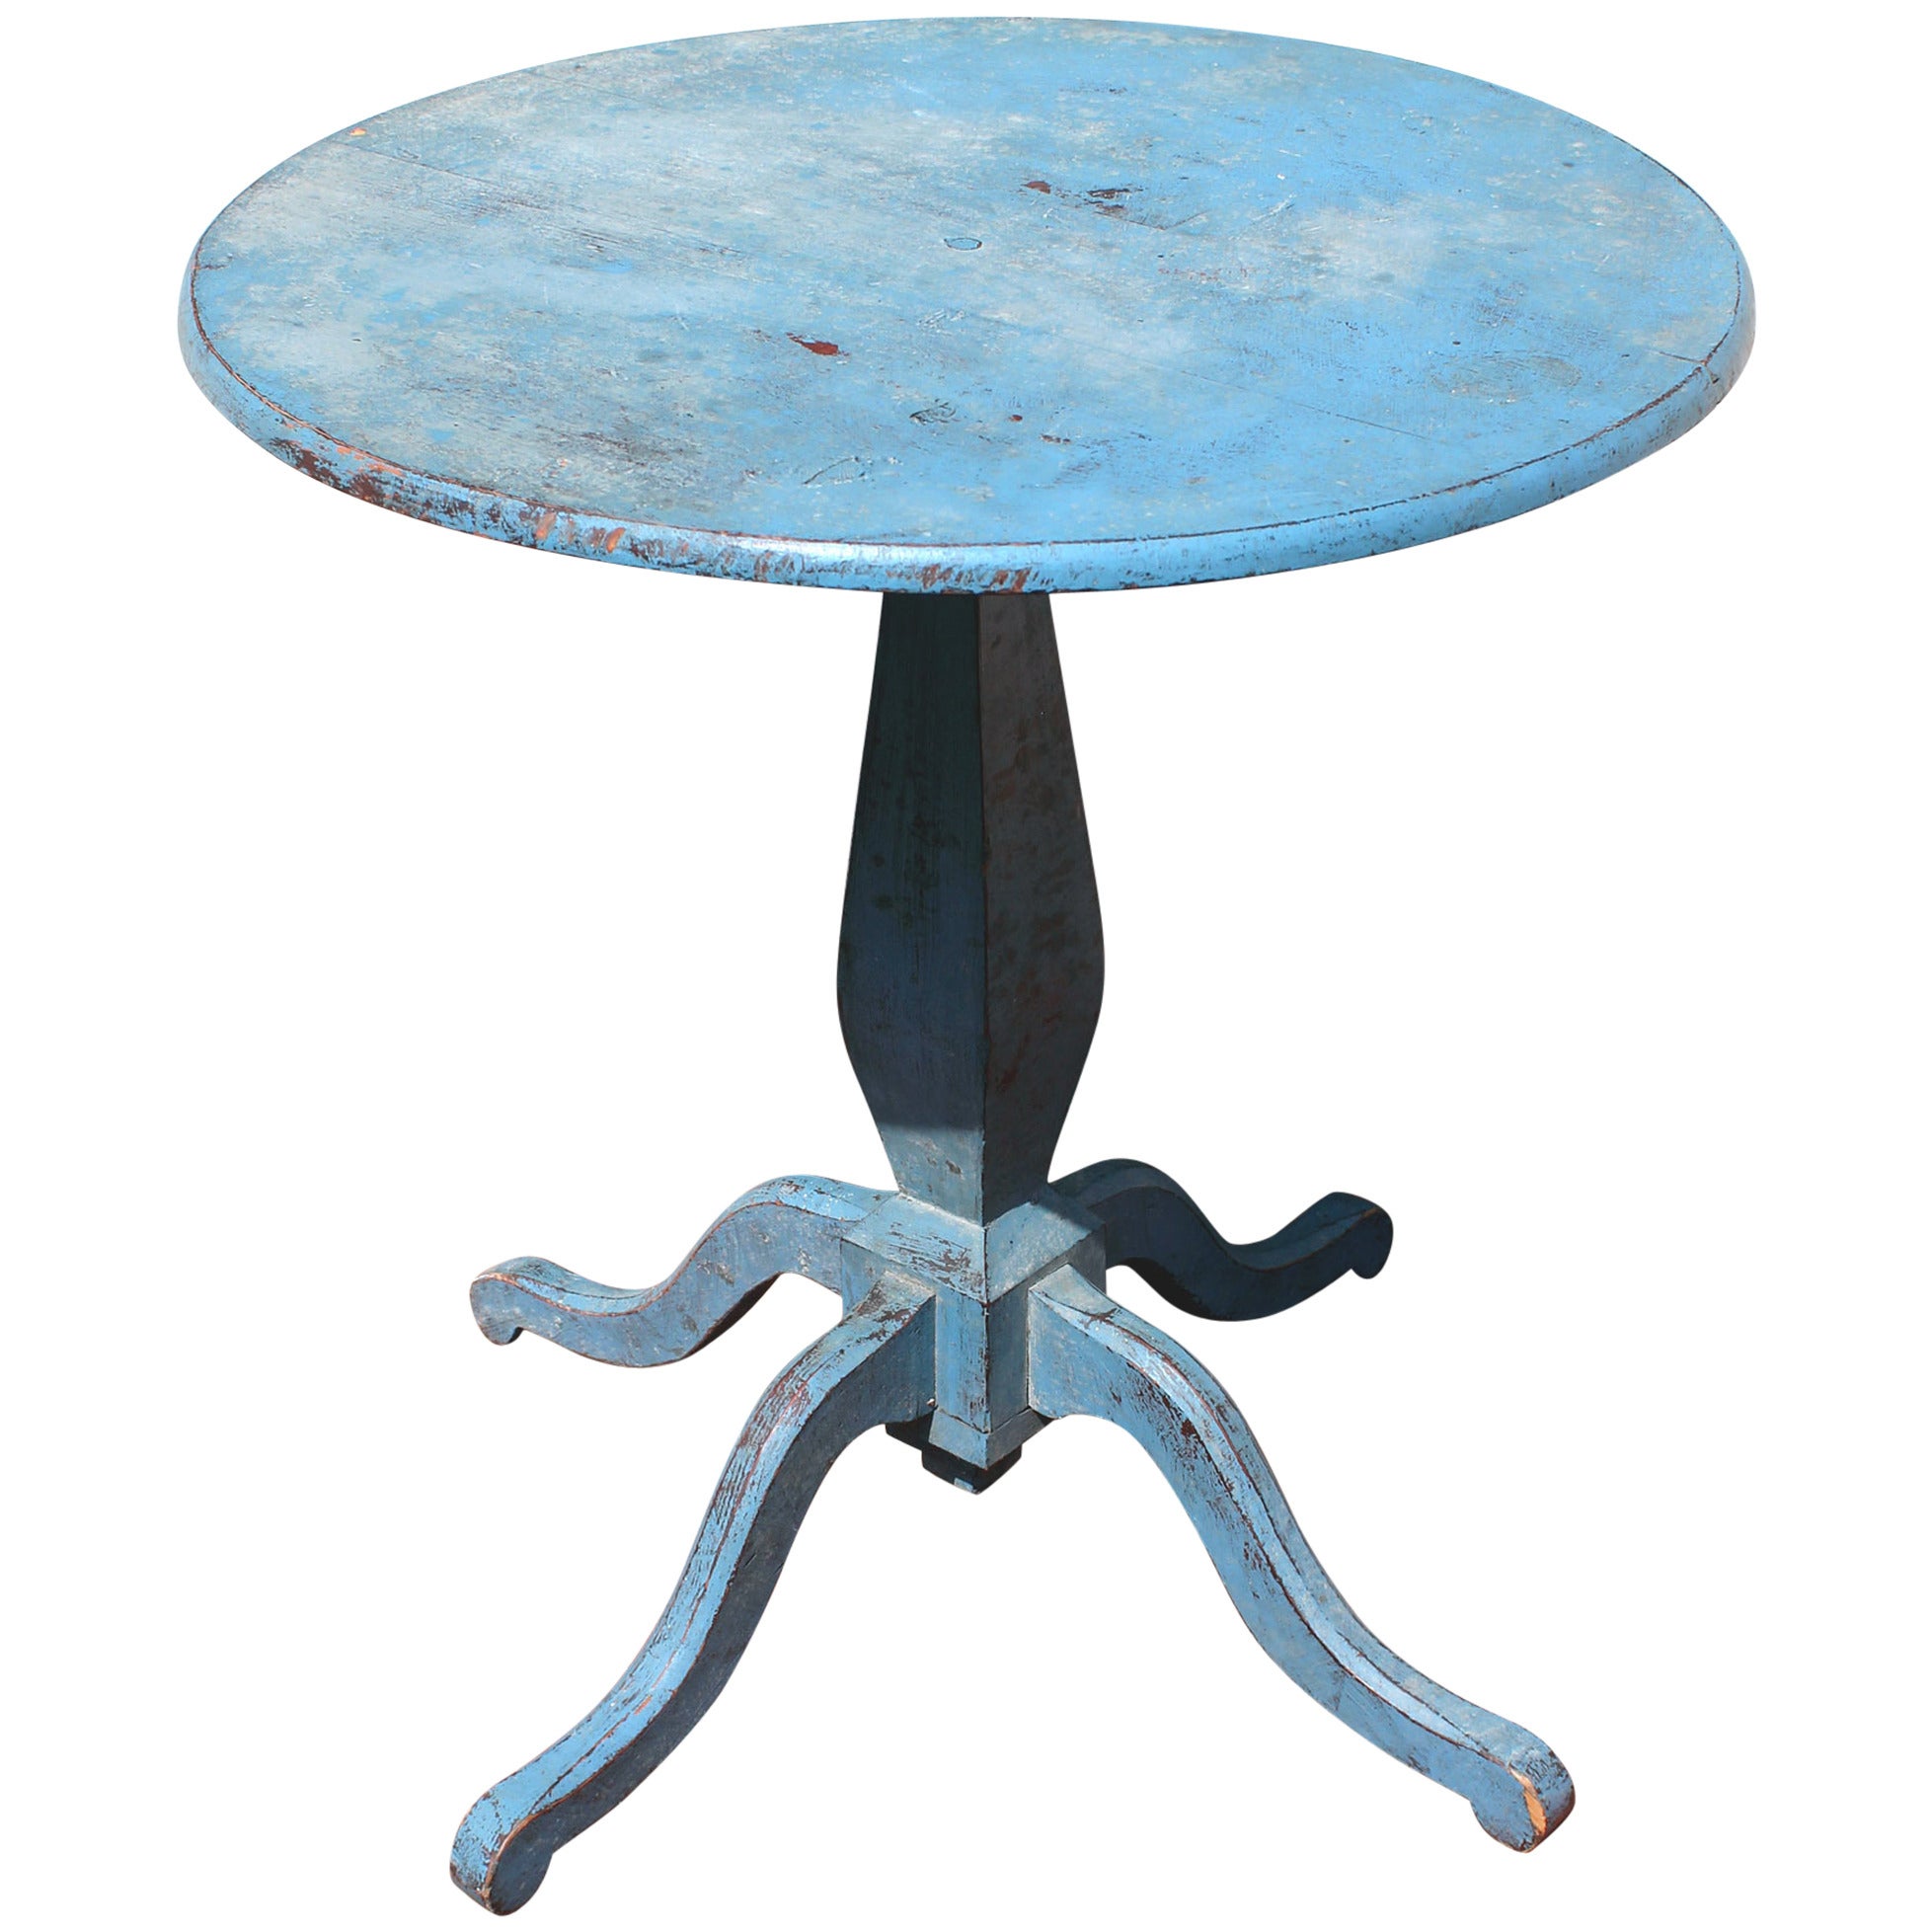 Blue Painted Pedestal Table, 19th century, American